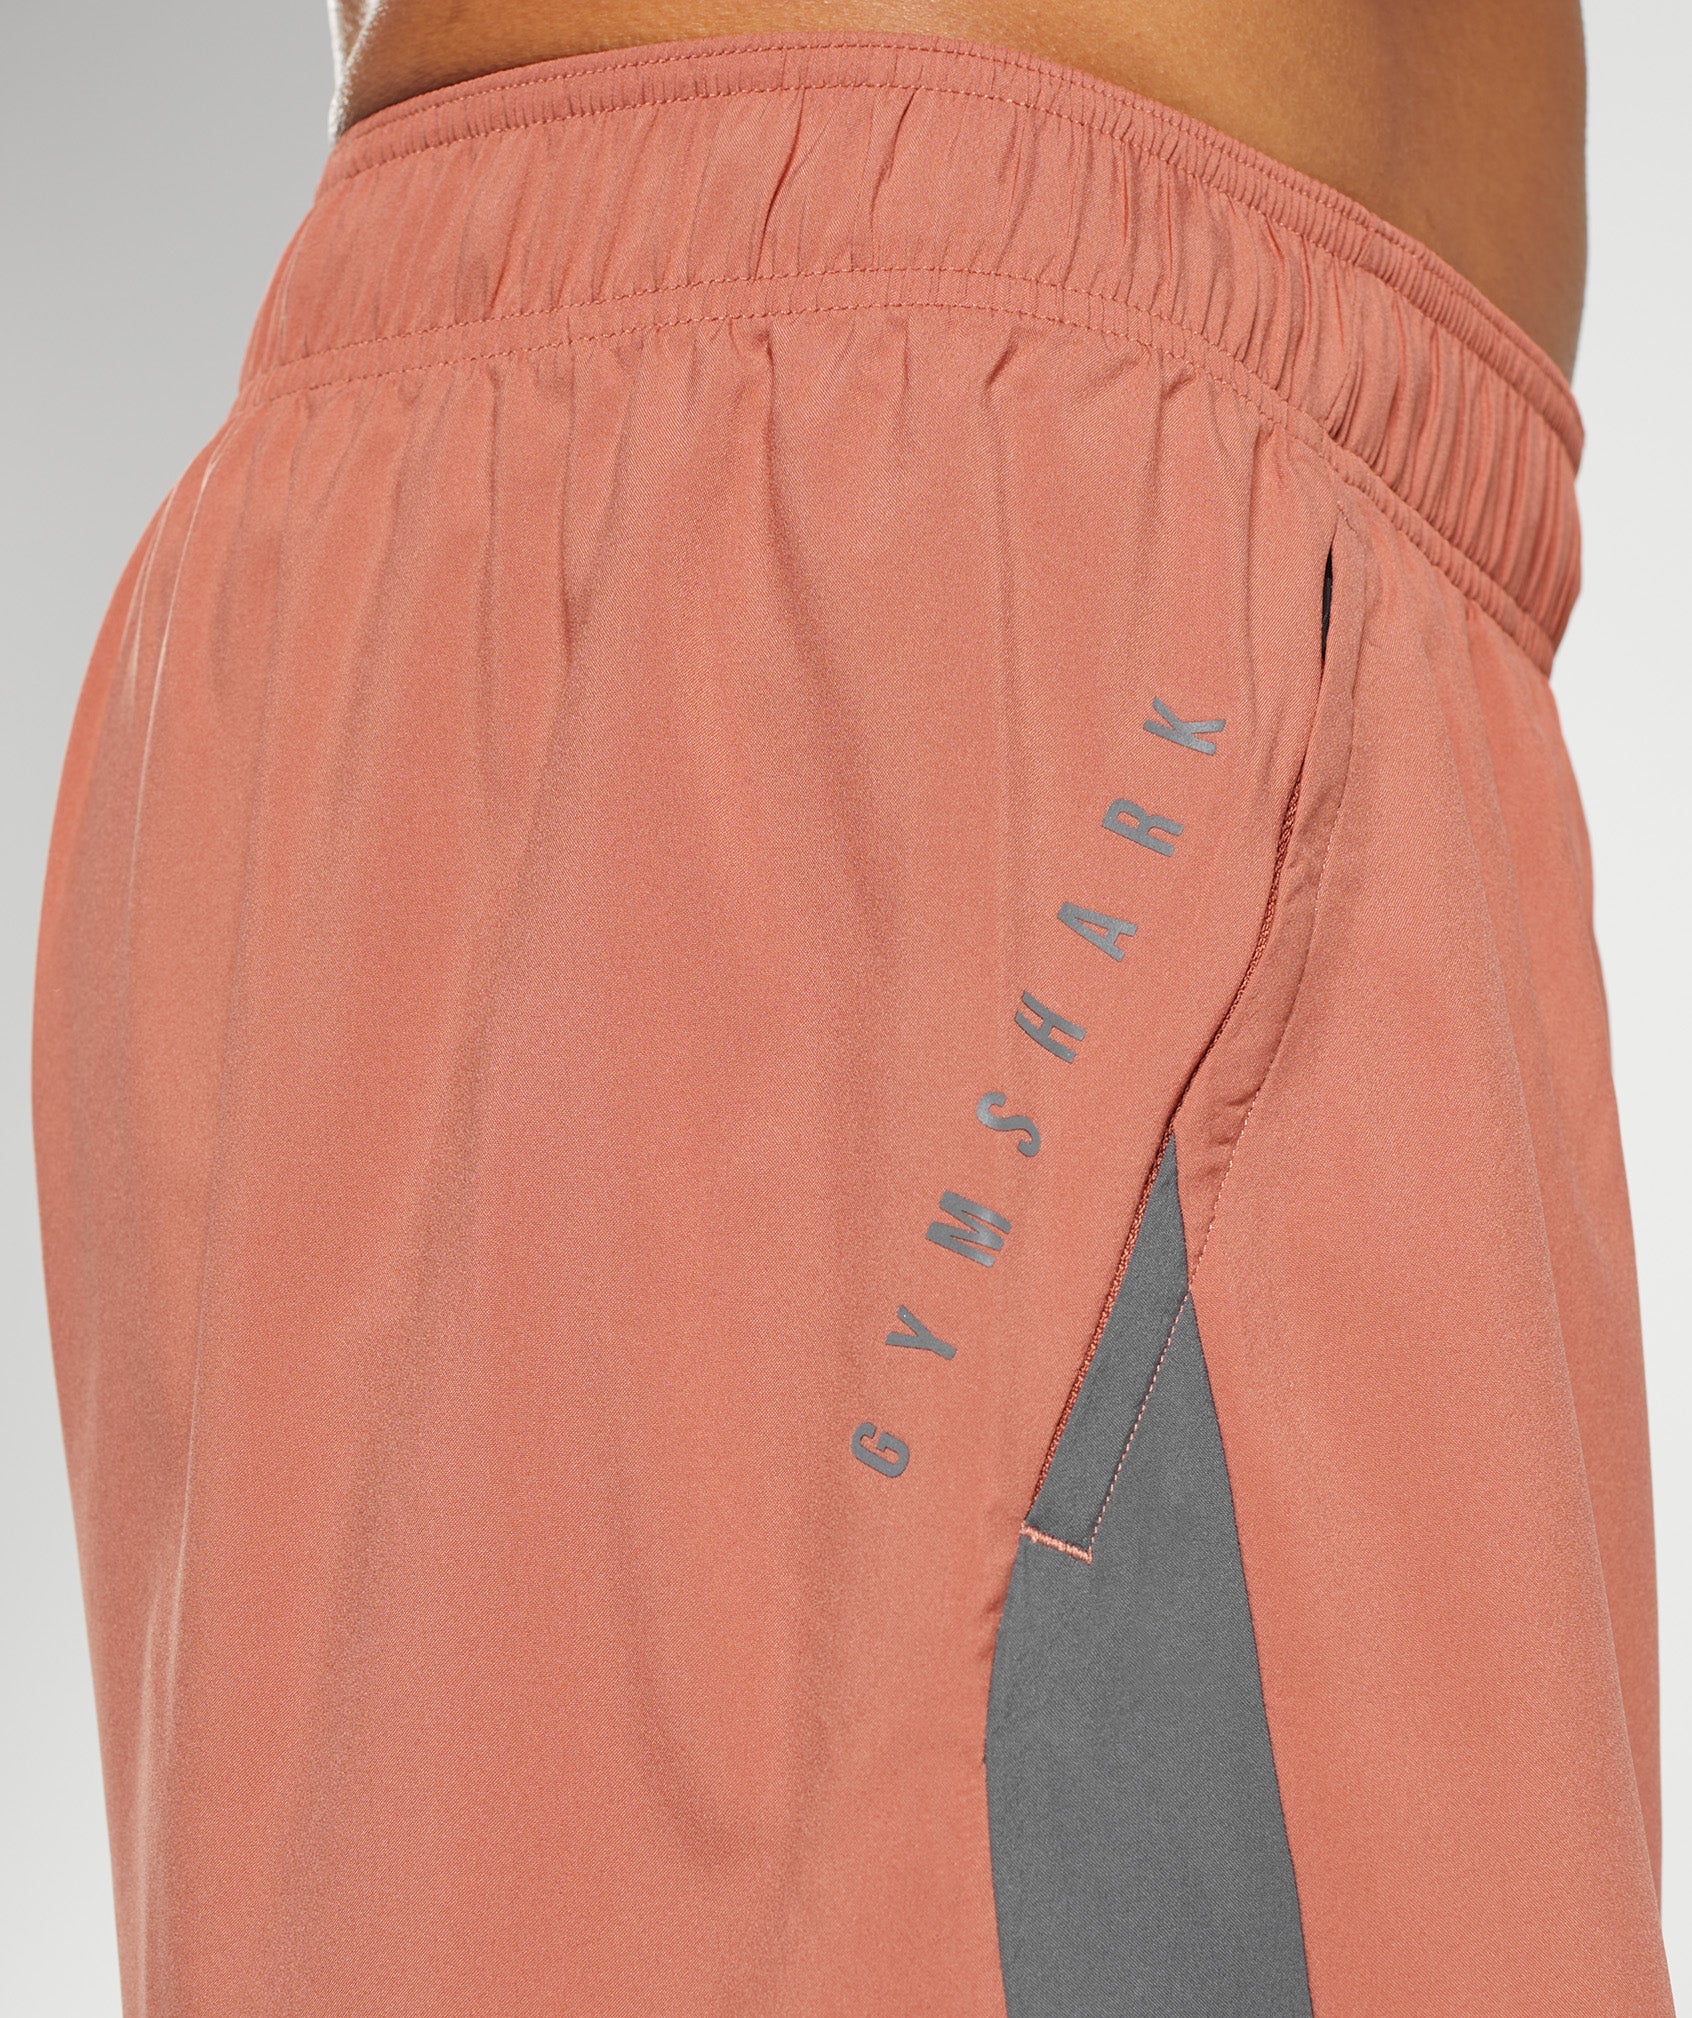 Sport Shorts in Persimmon Red/Silhouette Grey